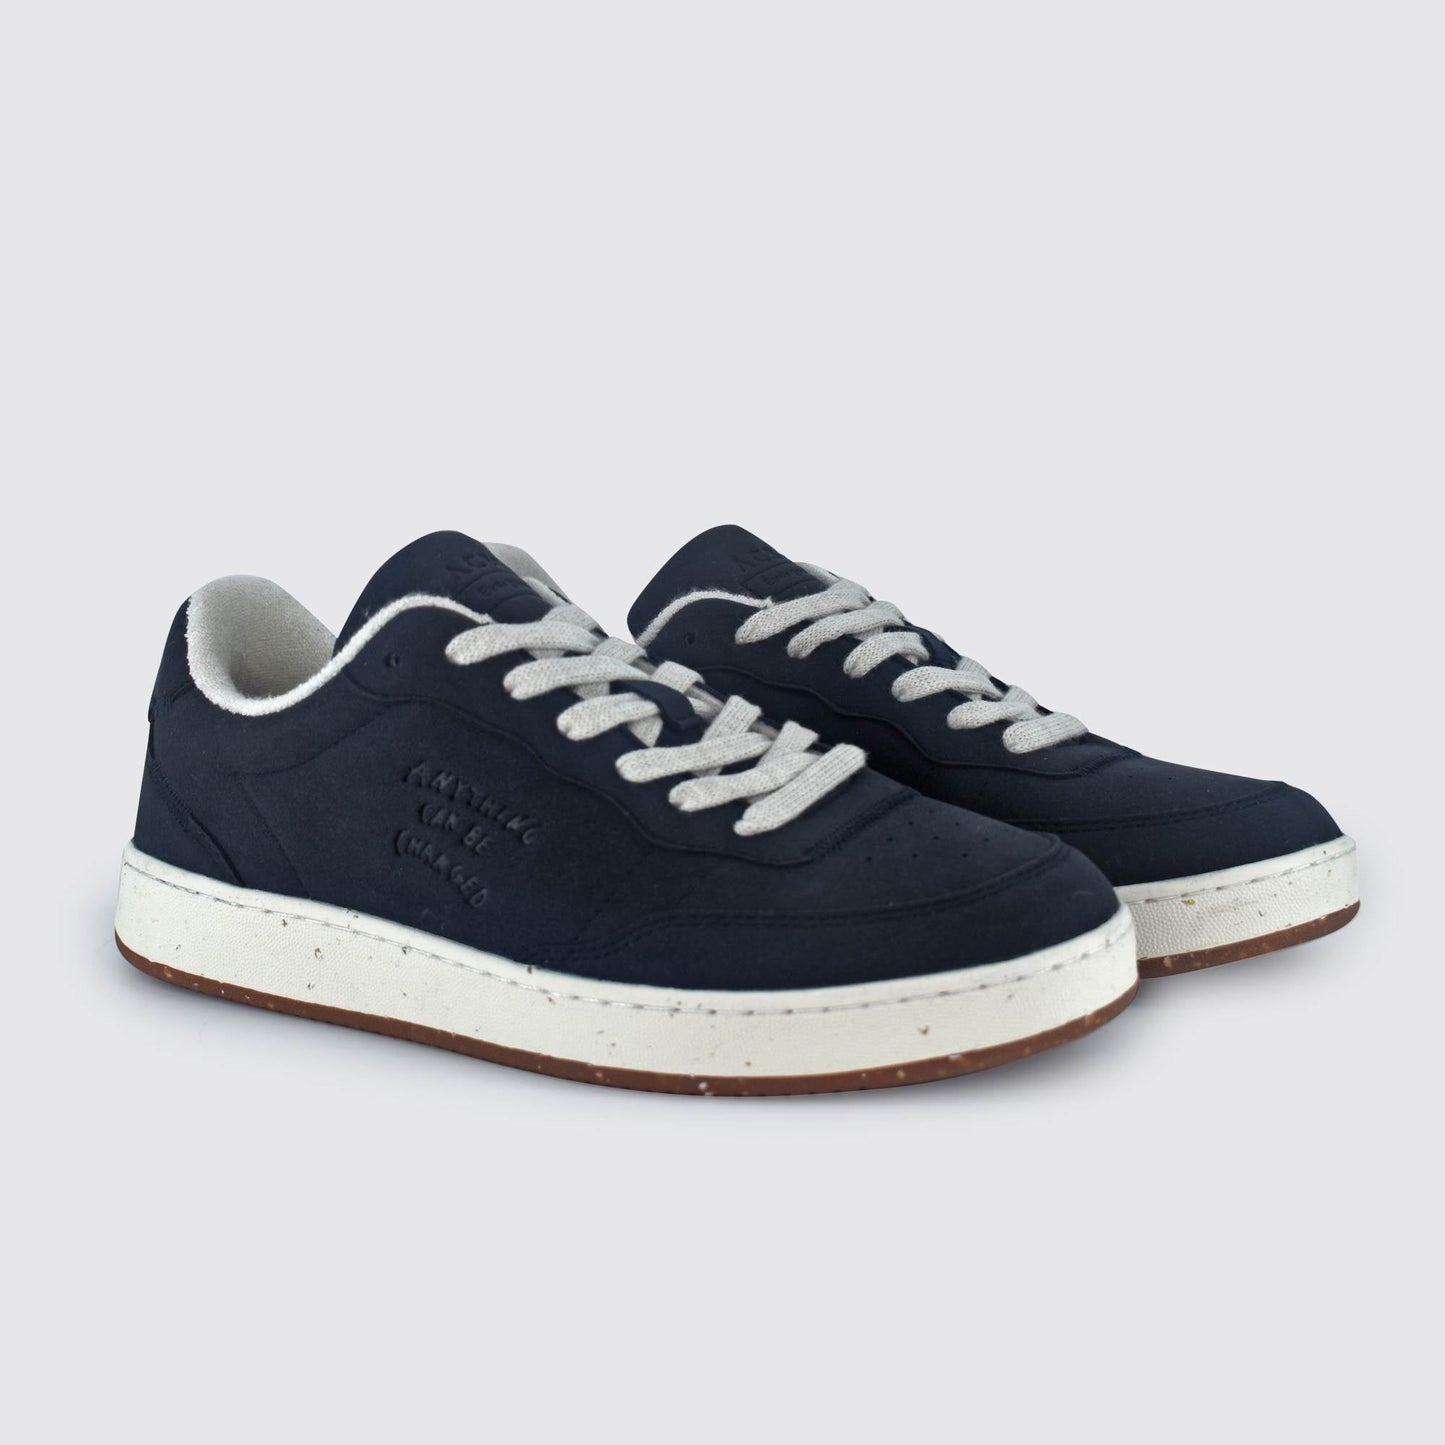 New - Evergreen Suede Blue Shoes